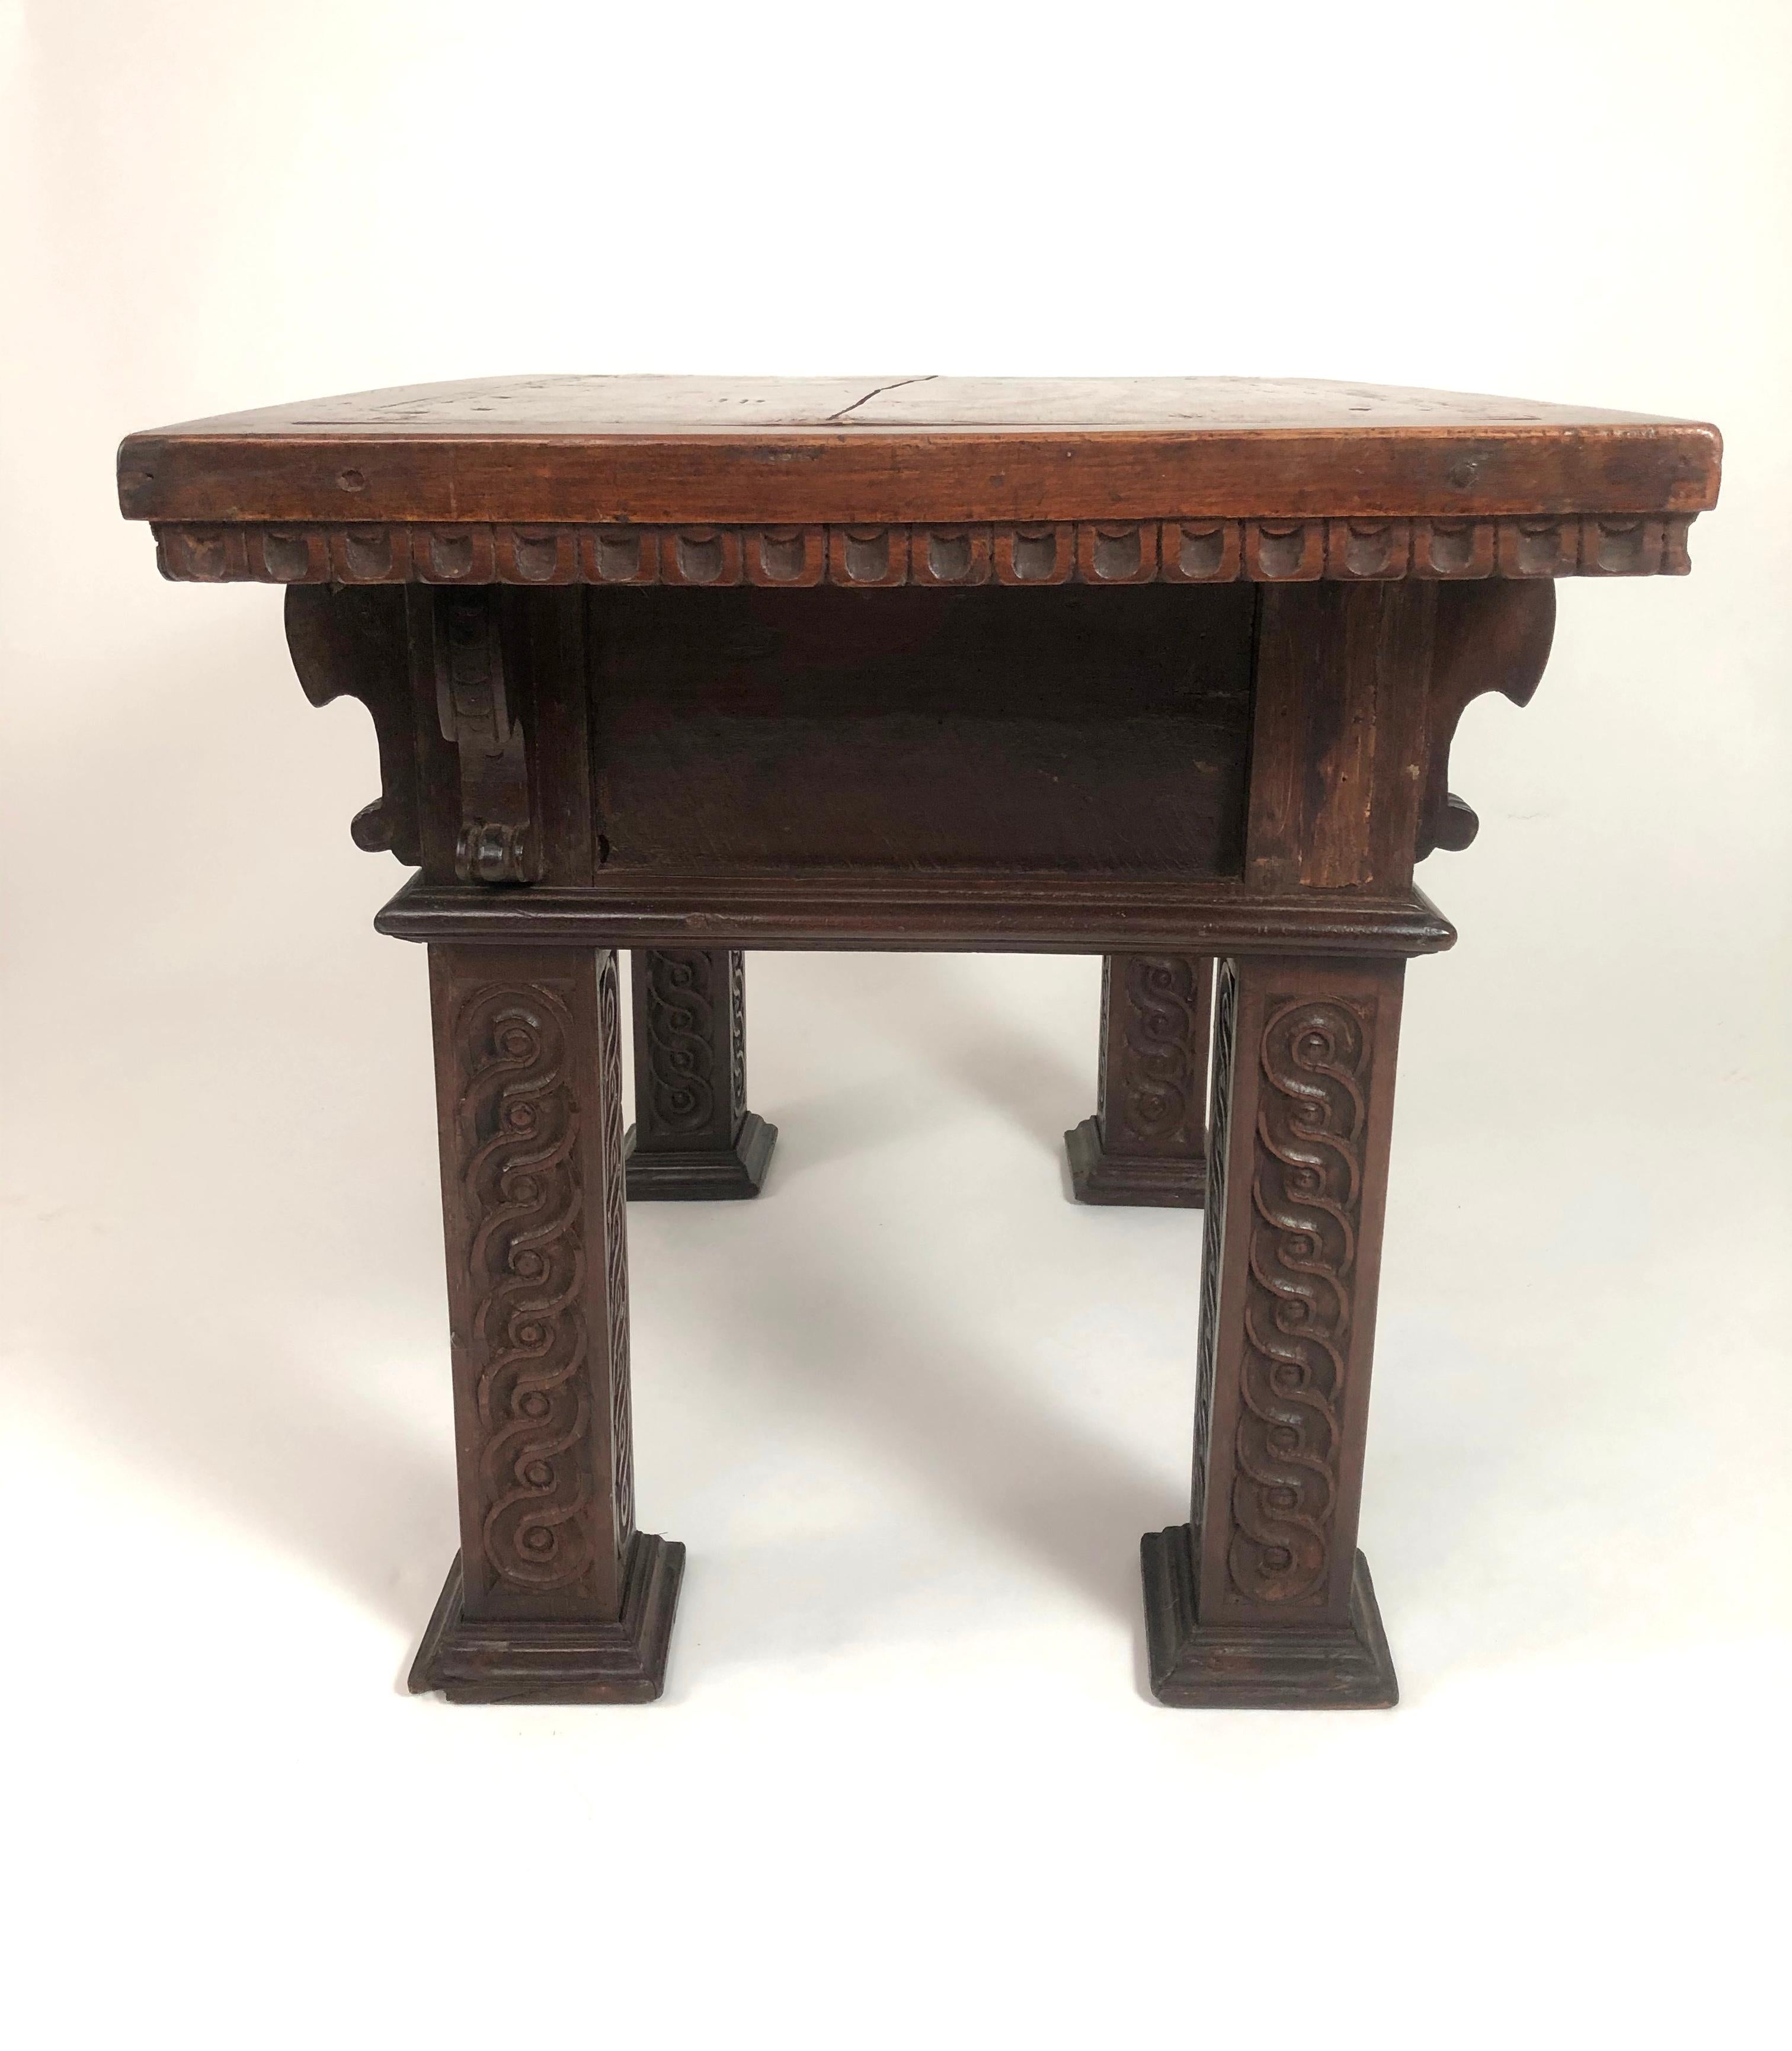 Italian Renaissance Revival Carved Oak and Walnut Side or Coffee Table 1